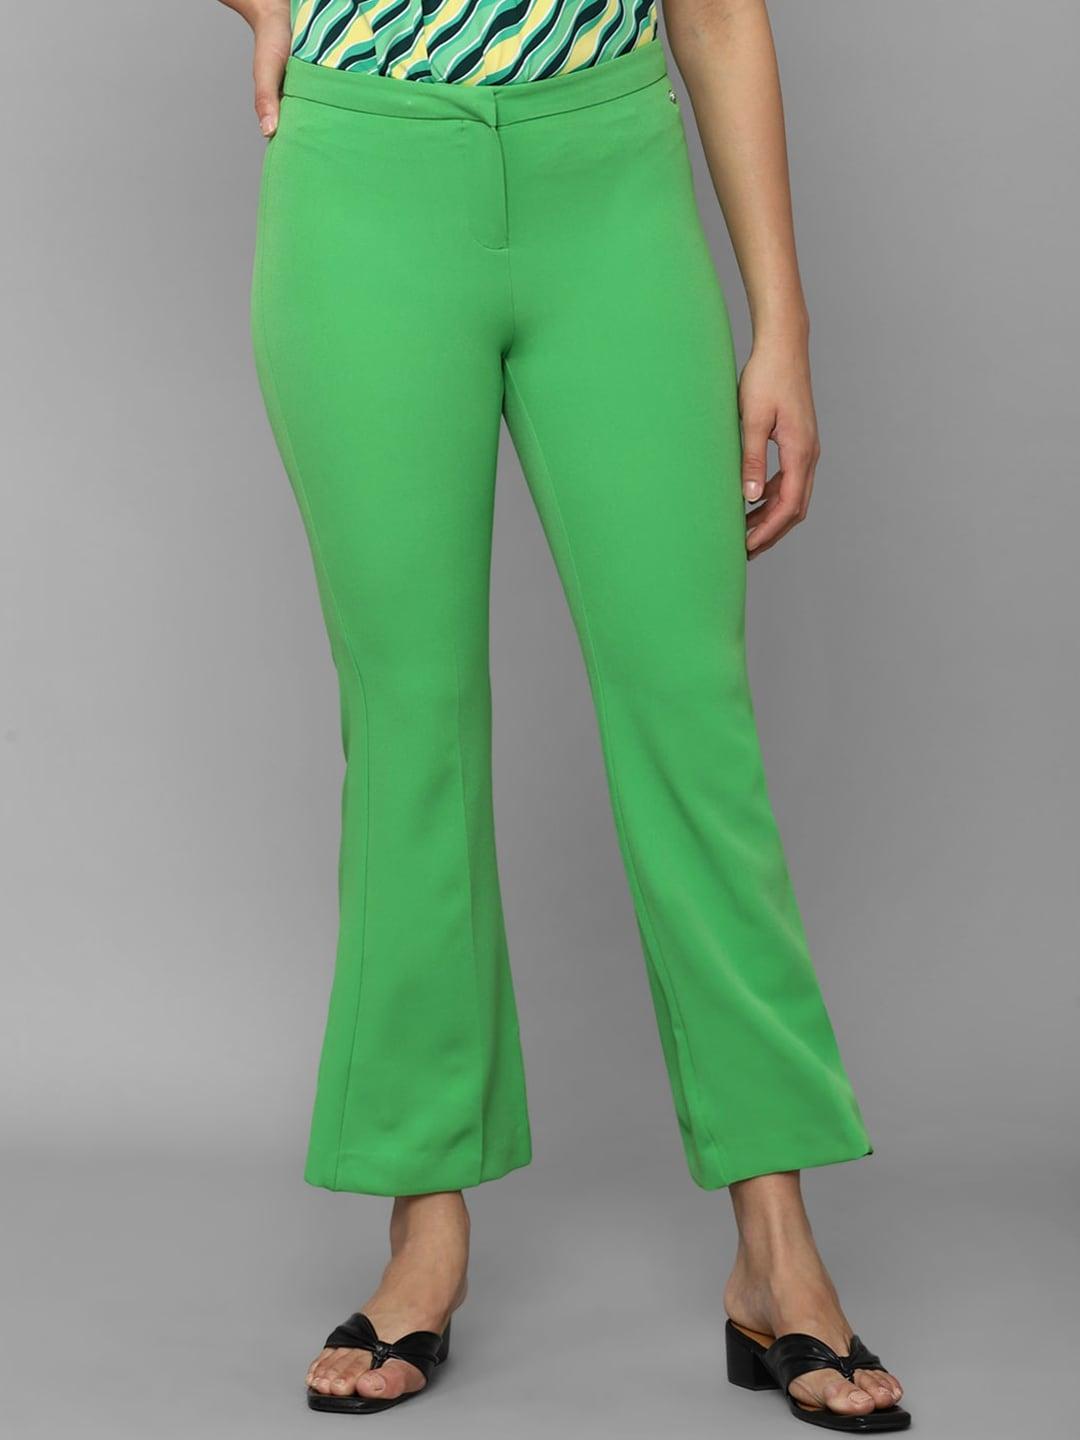 allen-solly-woman-high-rise-trousers